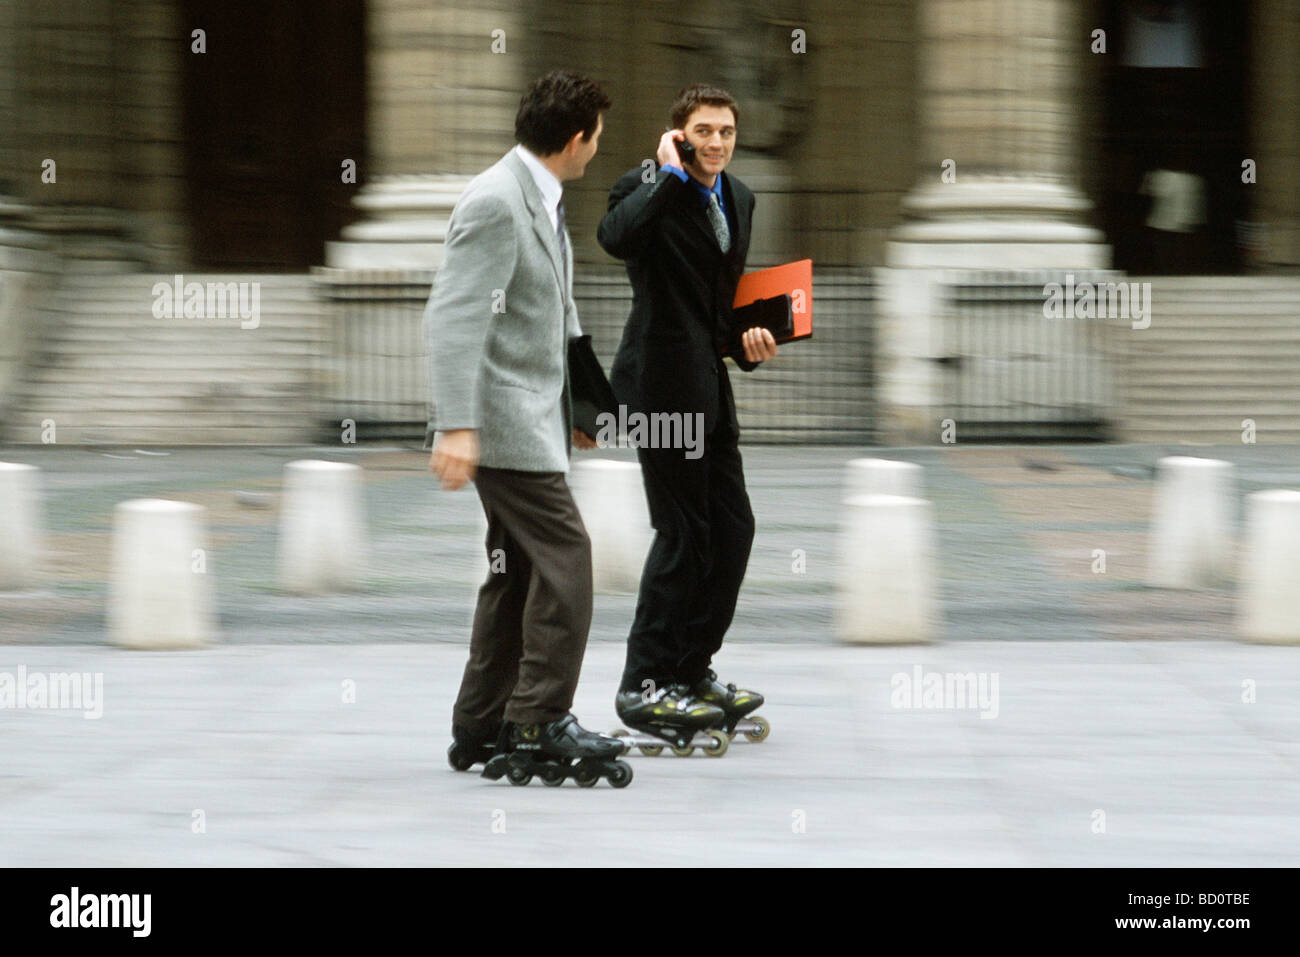 Men in business attire inline skating together along sidewalk, one phoning Stock Photo